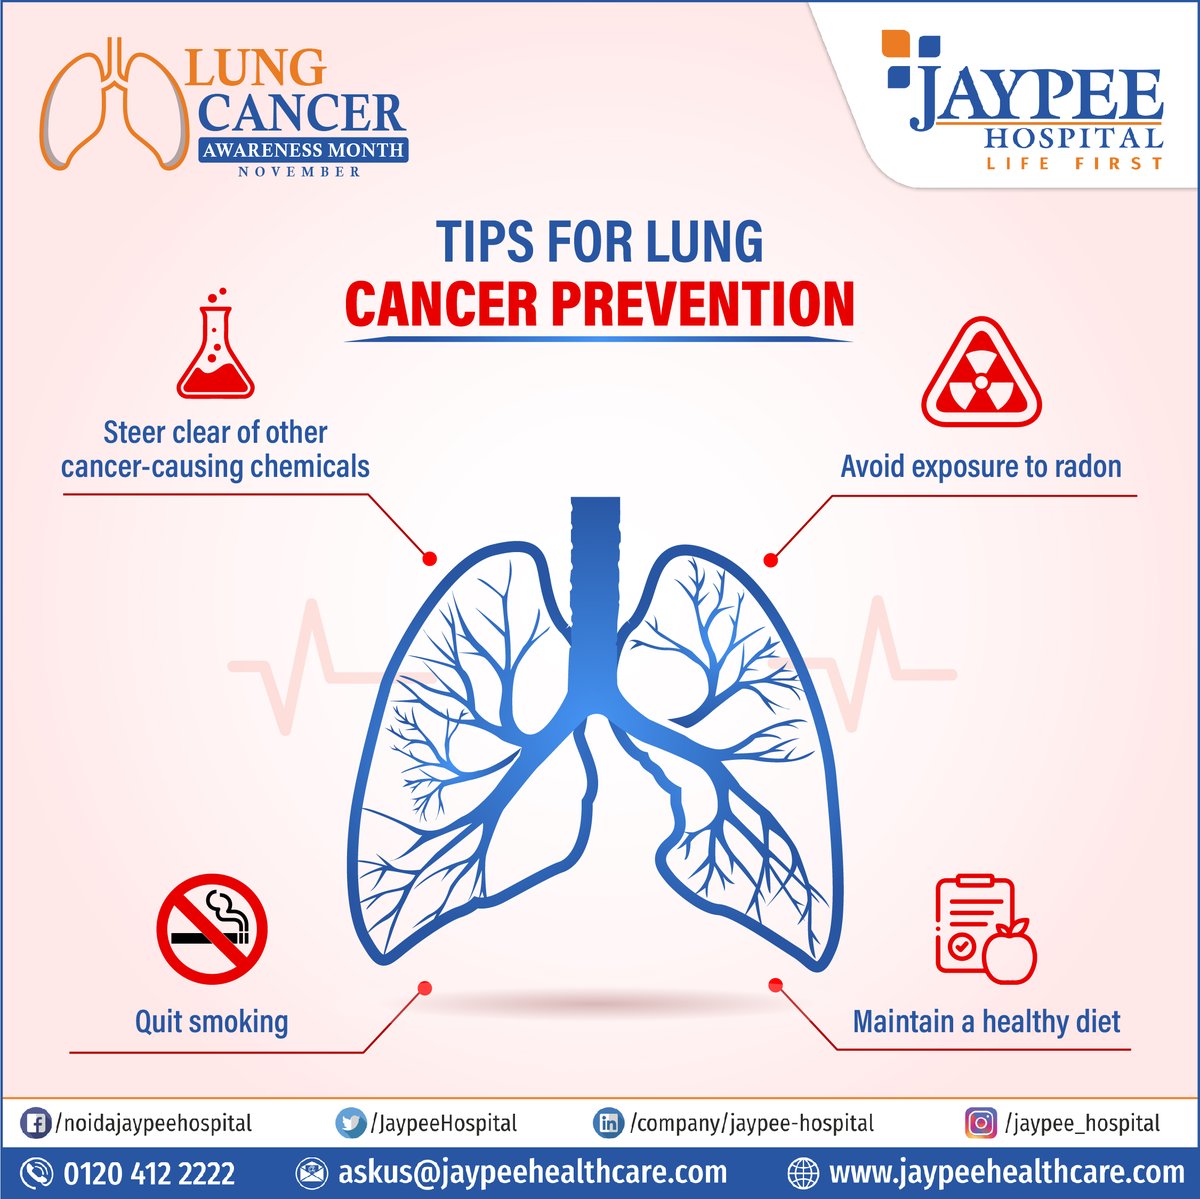 Certain lifestyle adjustments can reduce the risk of lung cancer.
#lungcancer  #lungcancerprevention #jaypeehospital